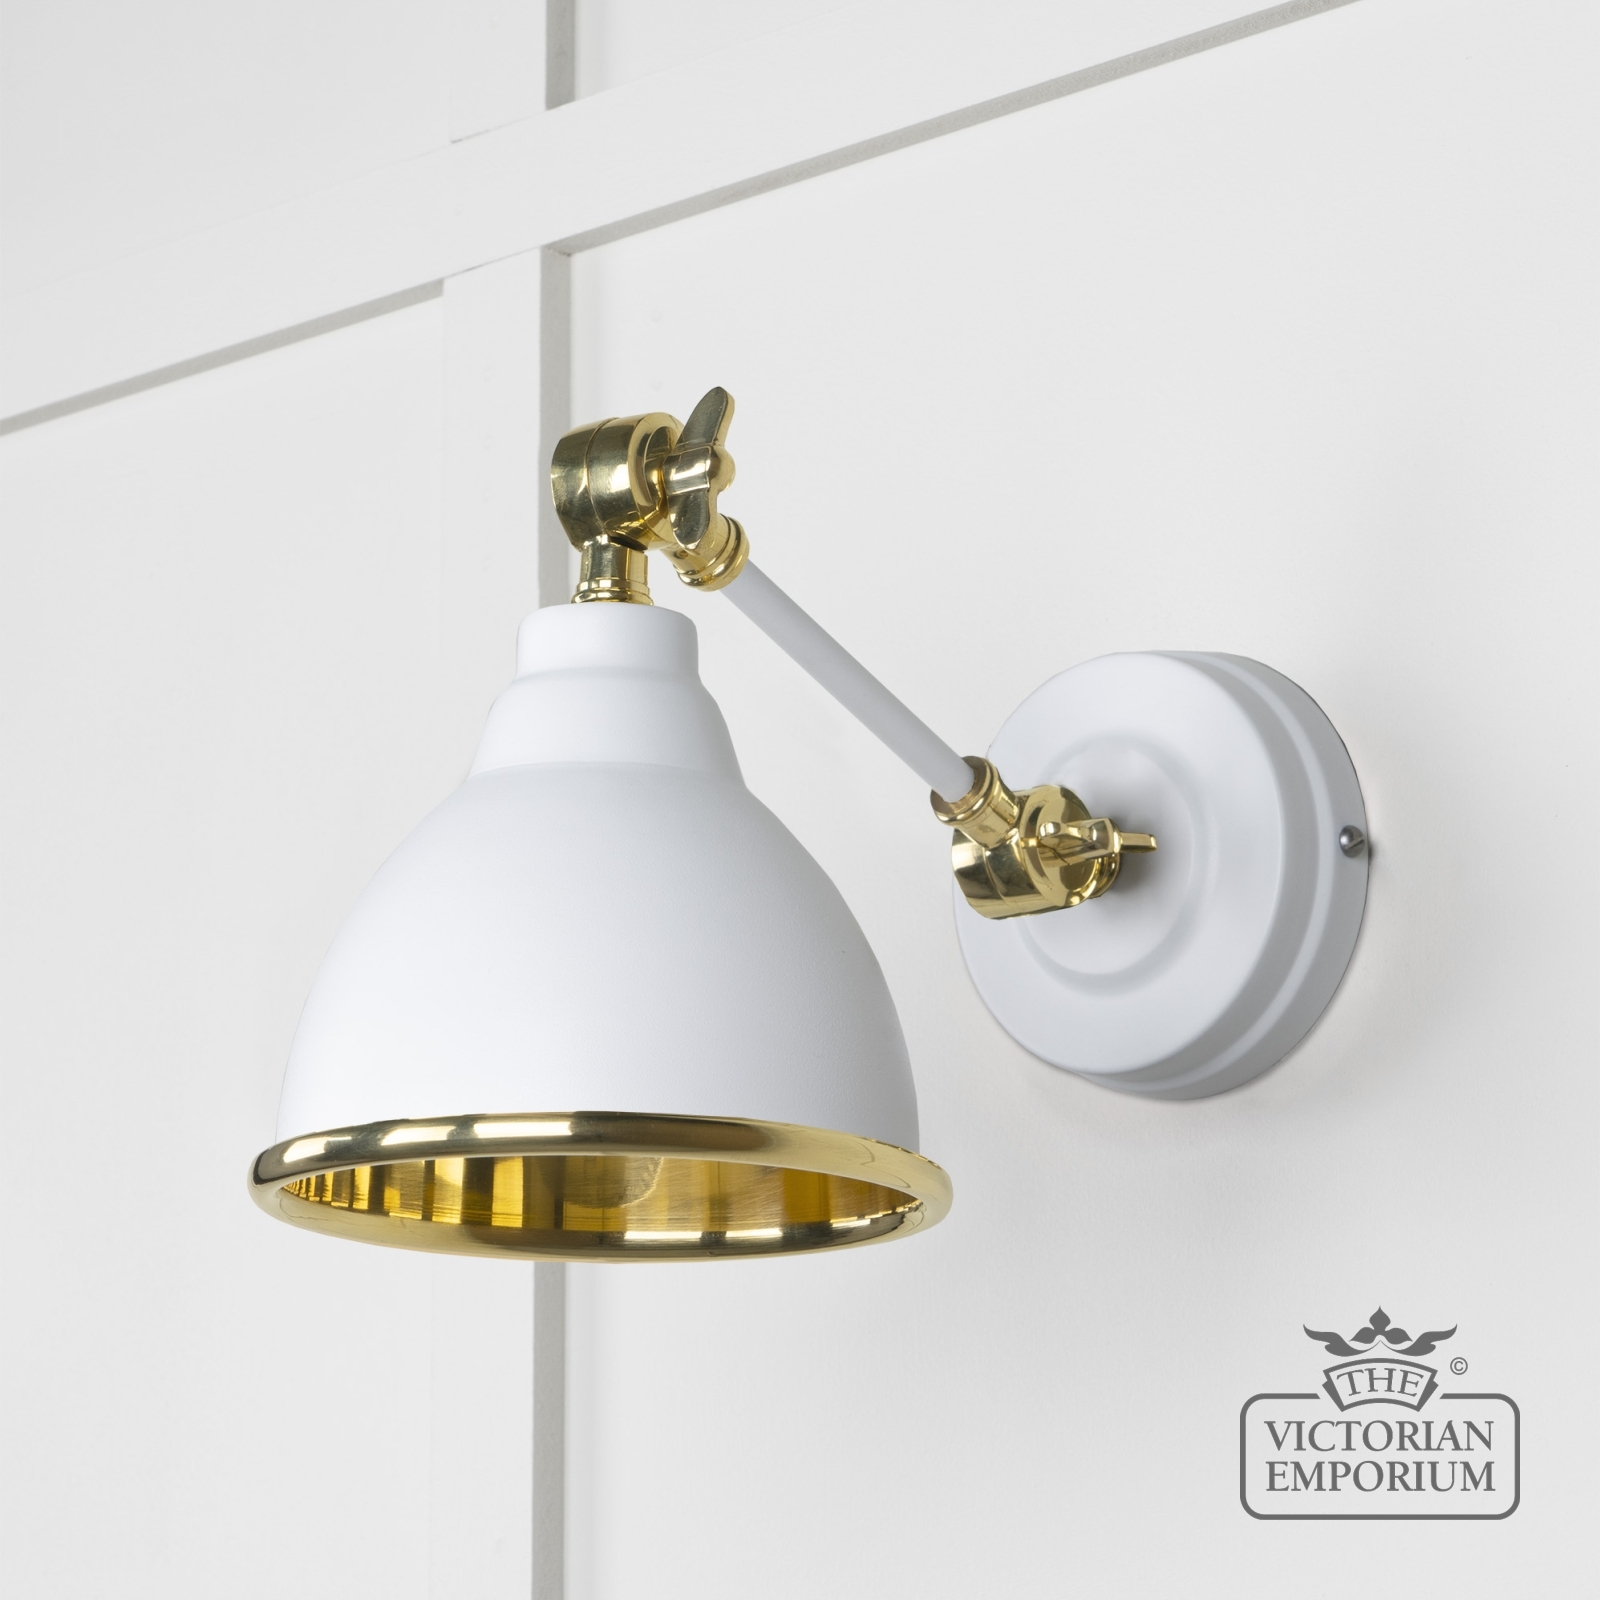 Brindle Wall Light with Smooth Brass Interior and Flock Exterior